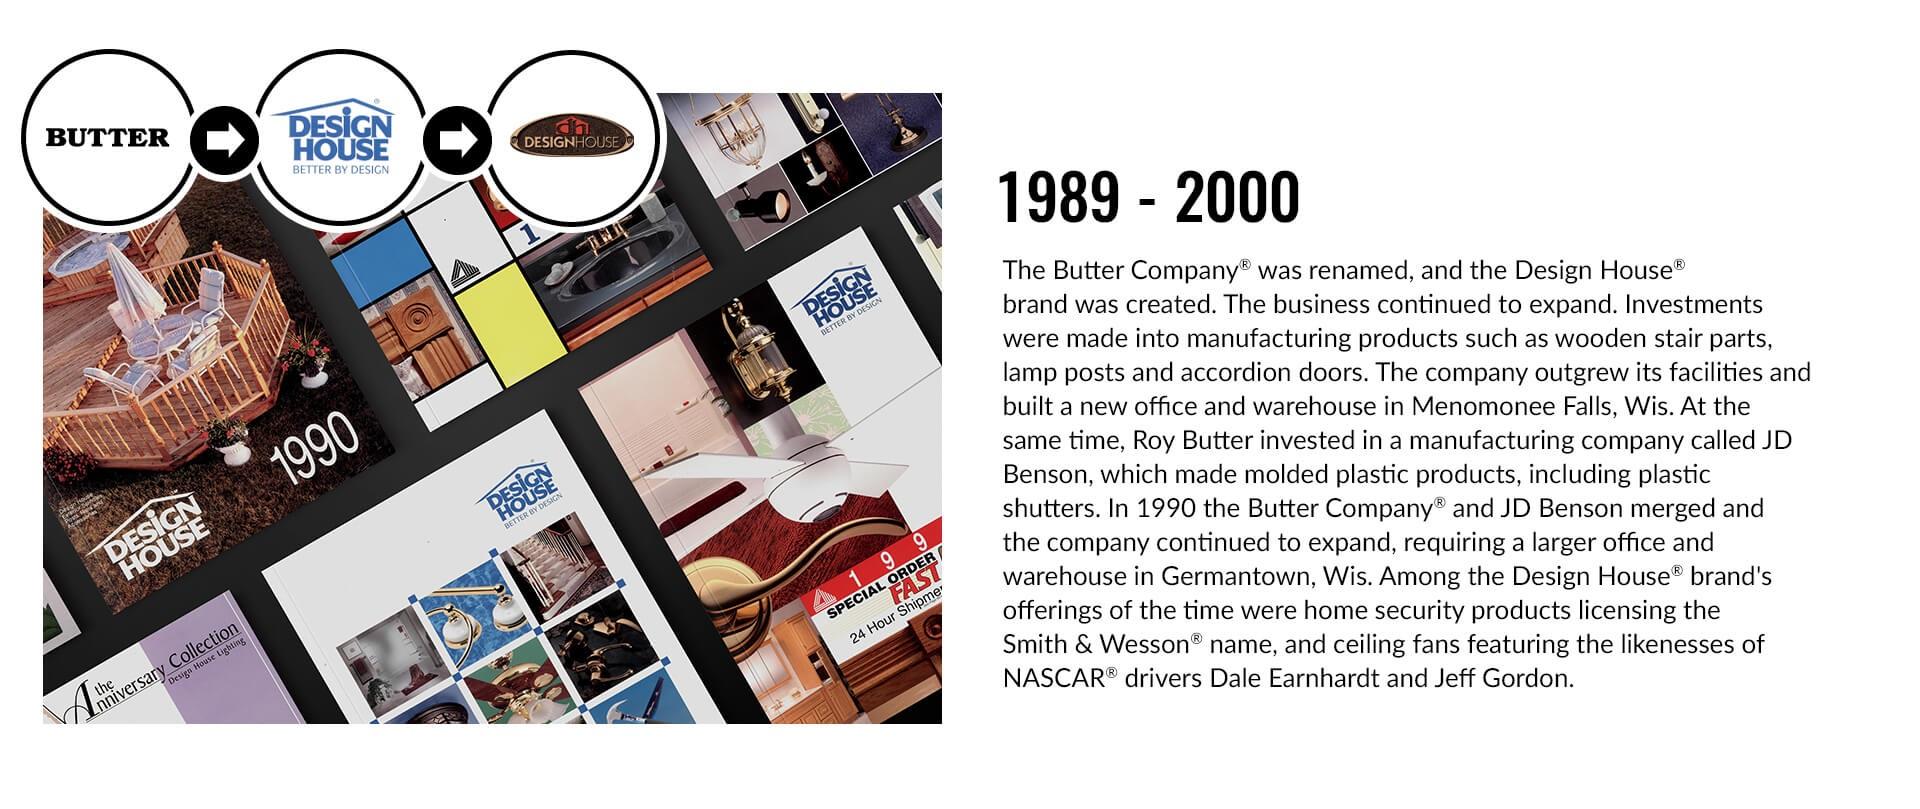 The Butter Company was renamed Design House and the business expanded rapidly